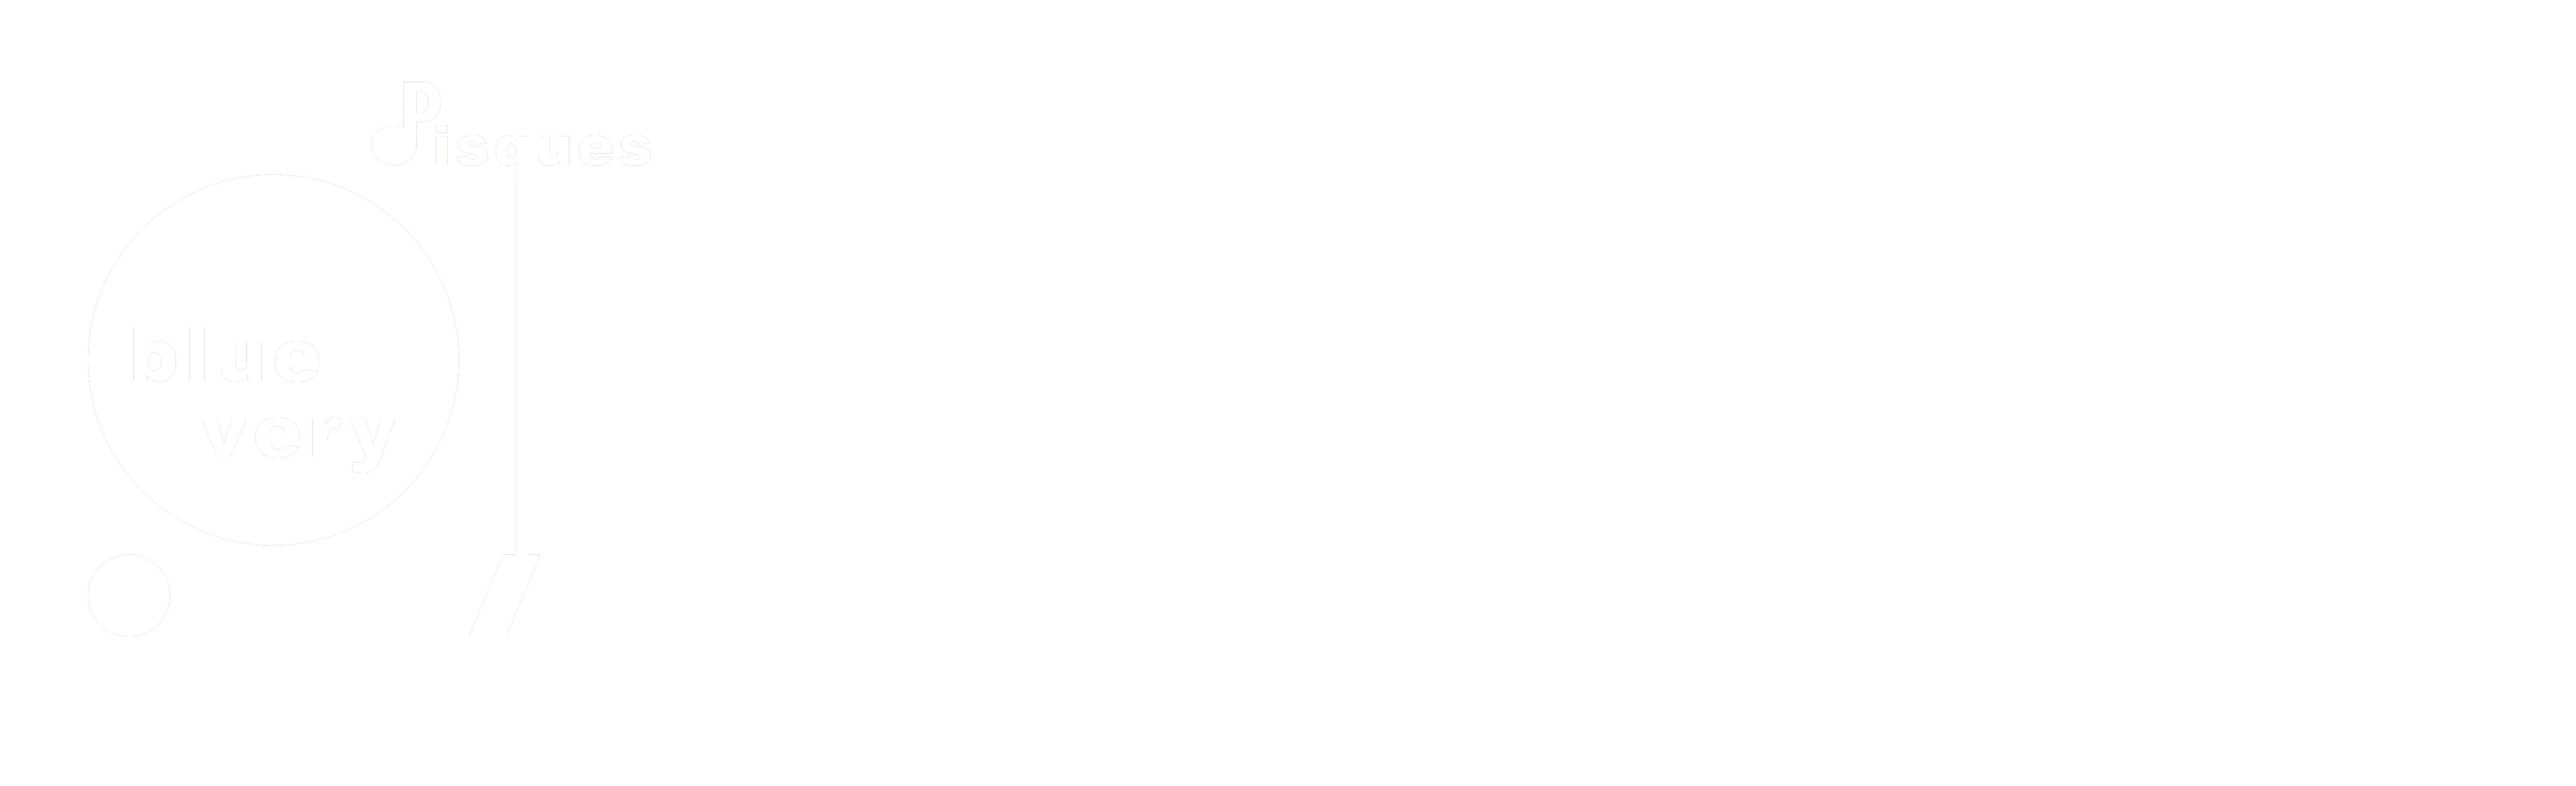 disques blue-very